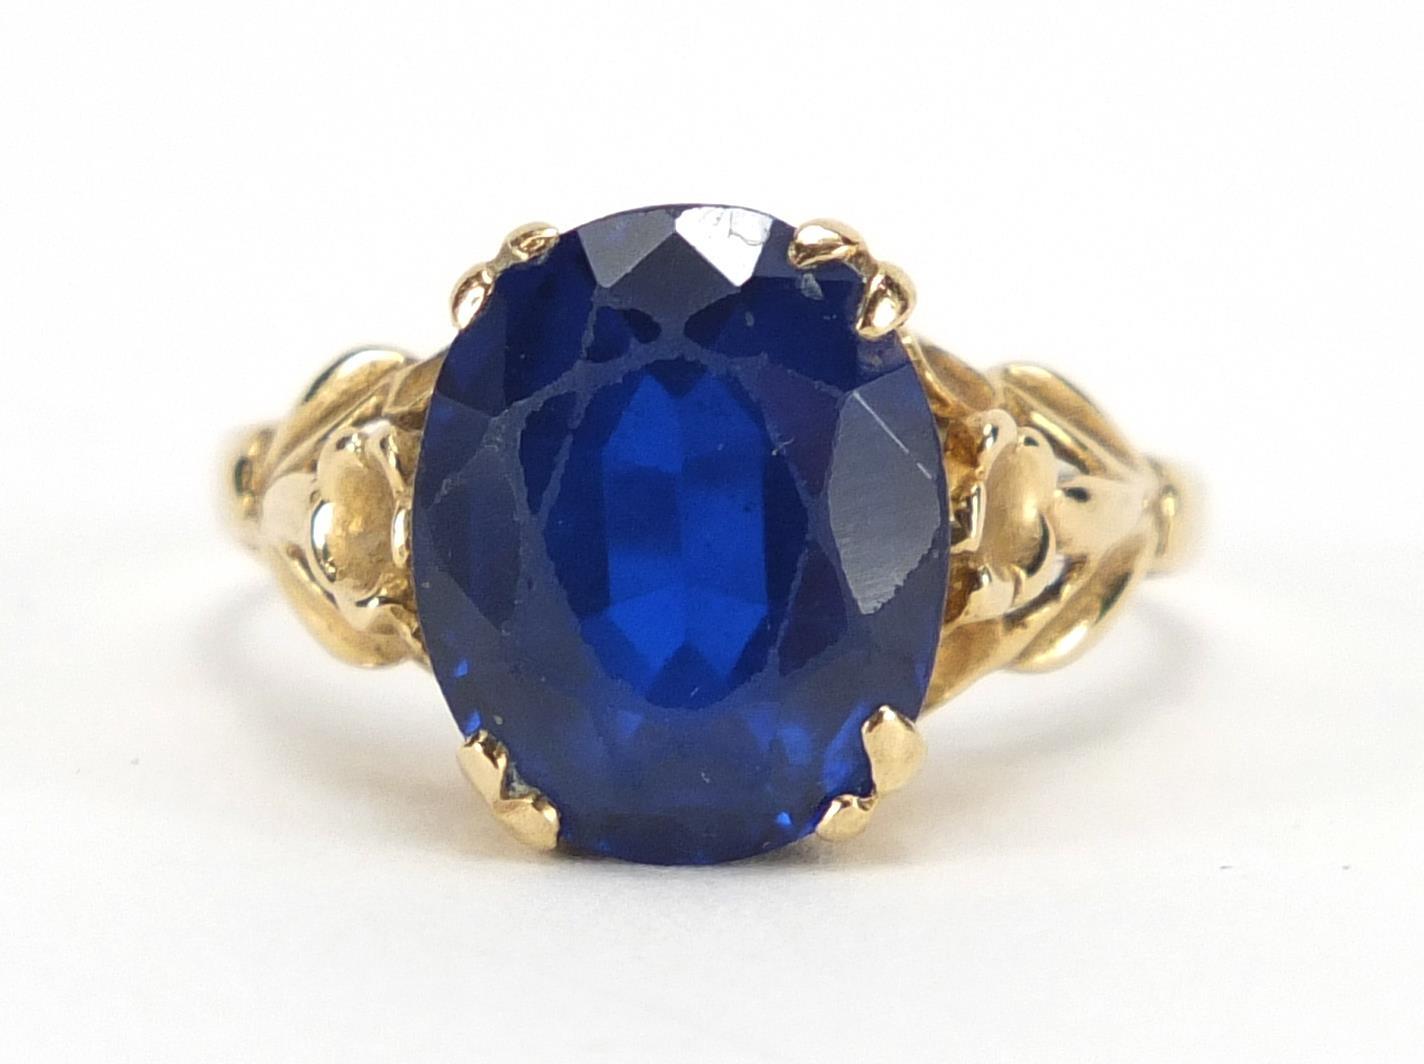 9ct gold blue stone solitaire ring, size O, approximate weight 3.6g : For Extra Condition Reports - Image 2 of 6